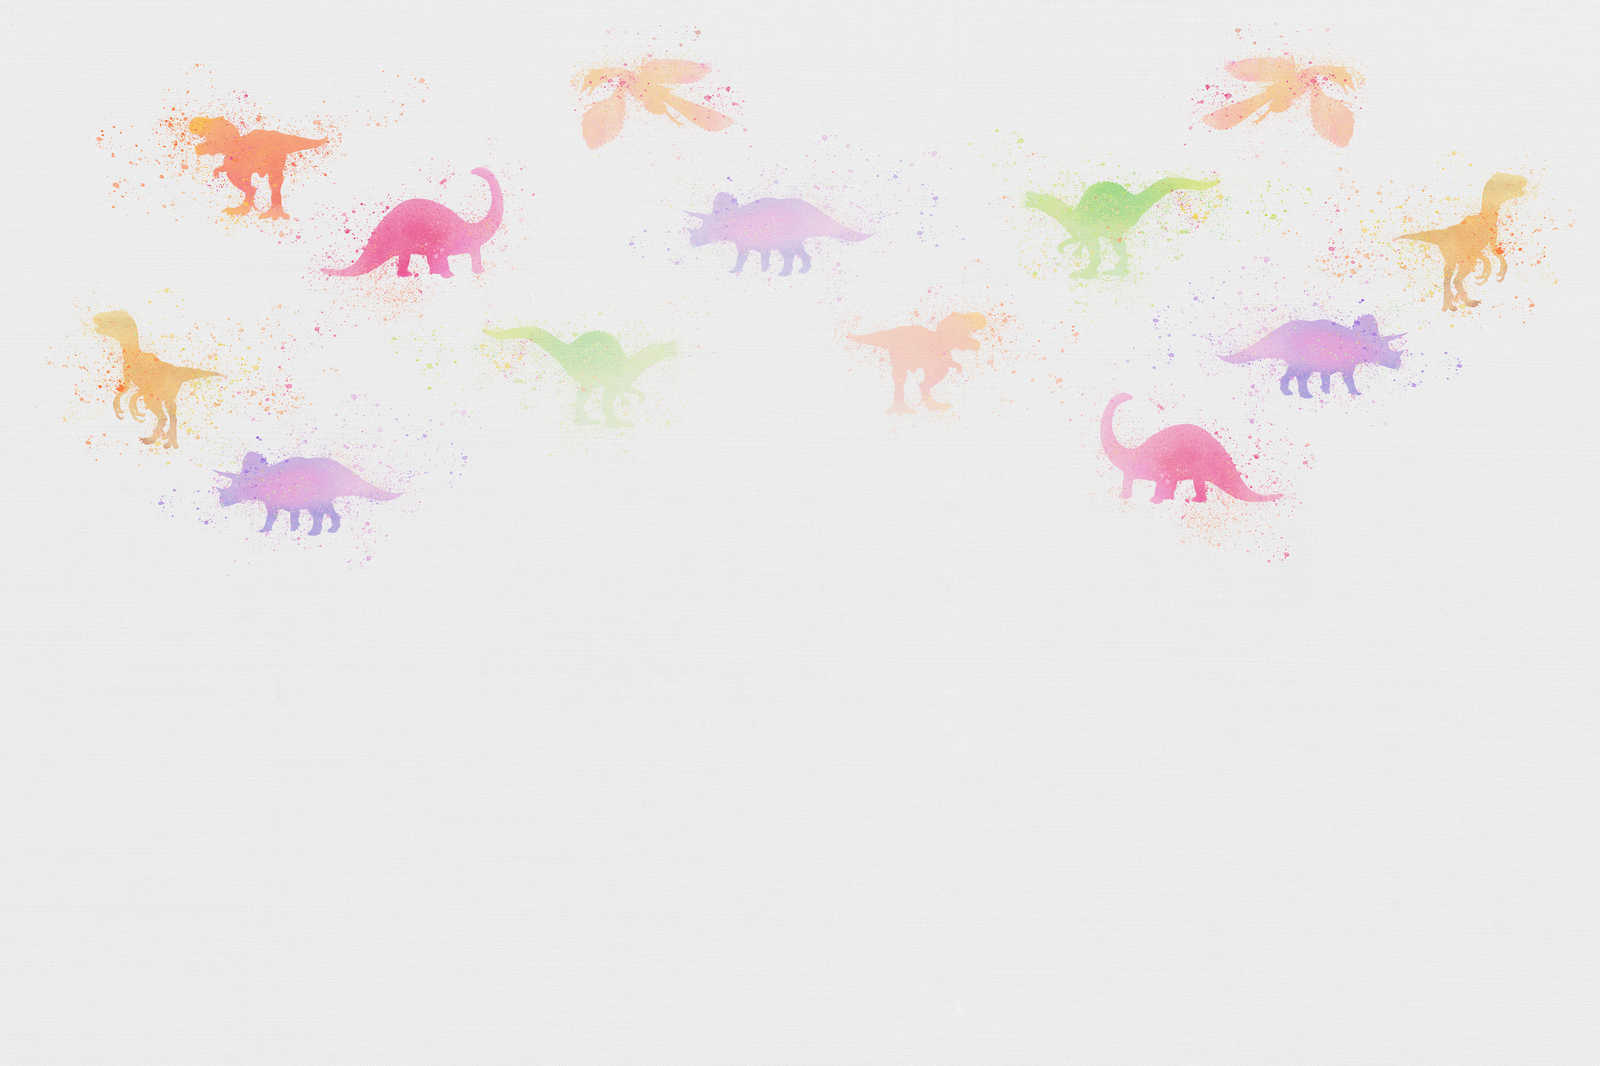             Canvas painting Nursery with little dinosaurs - 0,90 m x 0,60 m
        